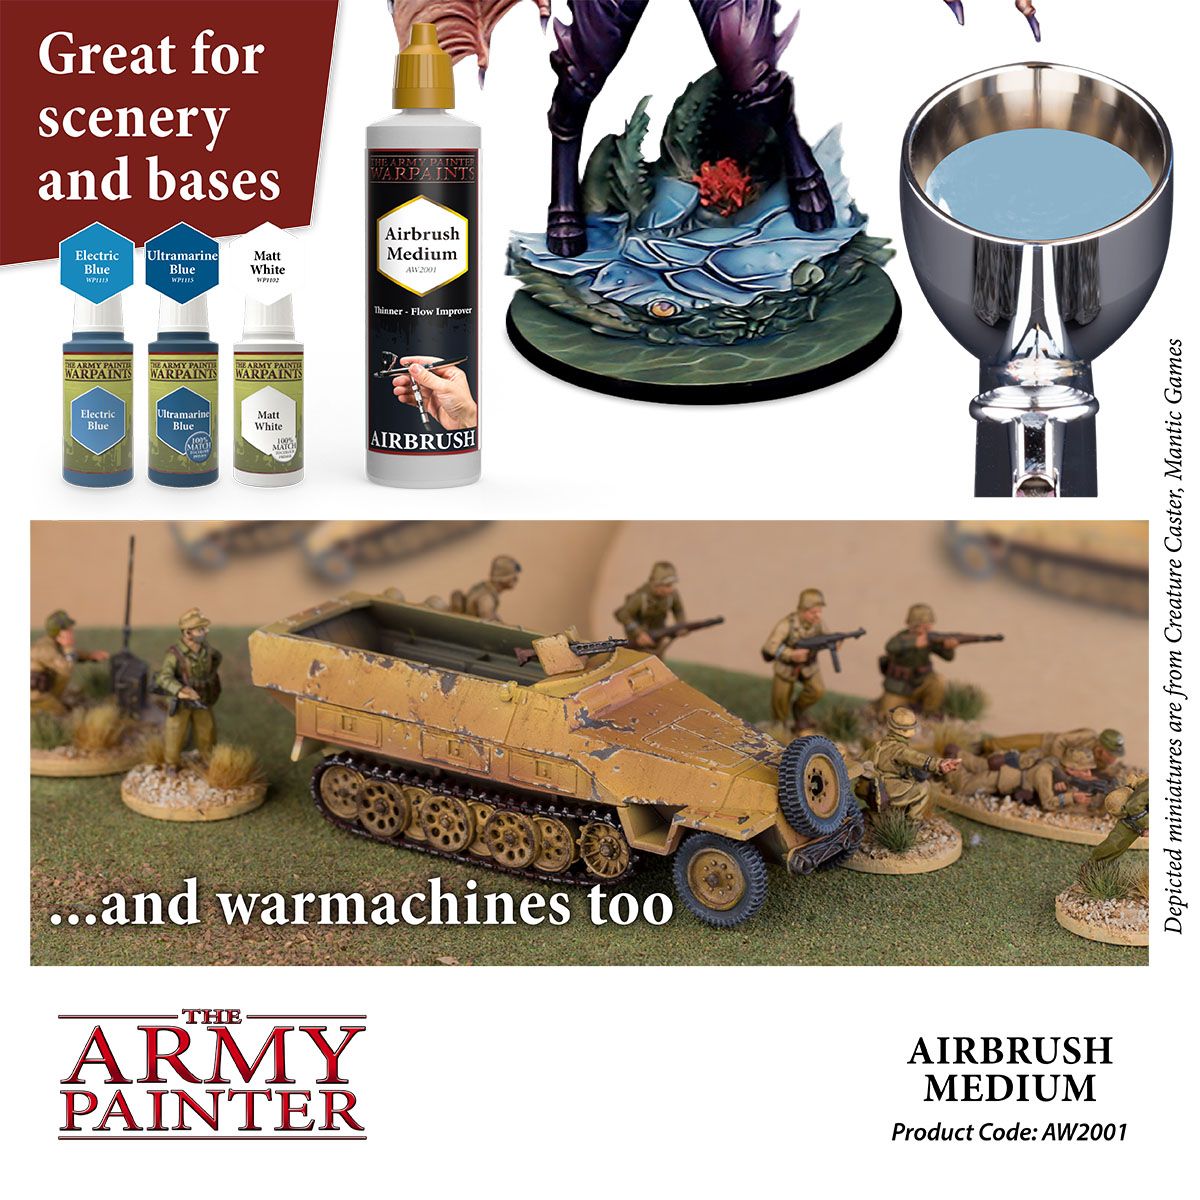 Paint: Army Painter - Warpaints Air: Thinner - Flow Improver